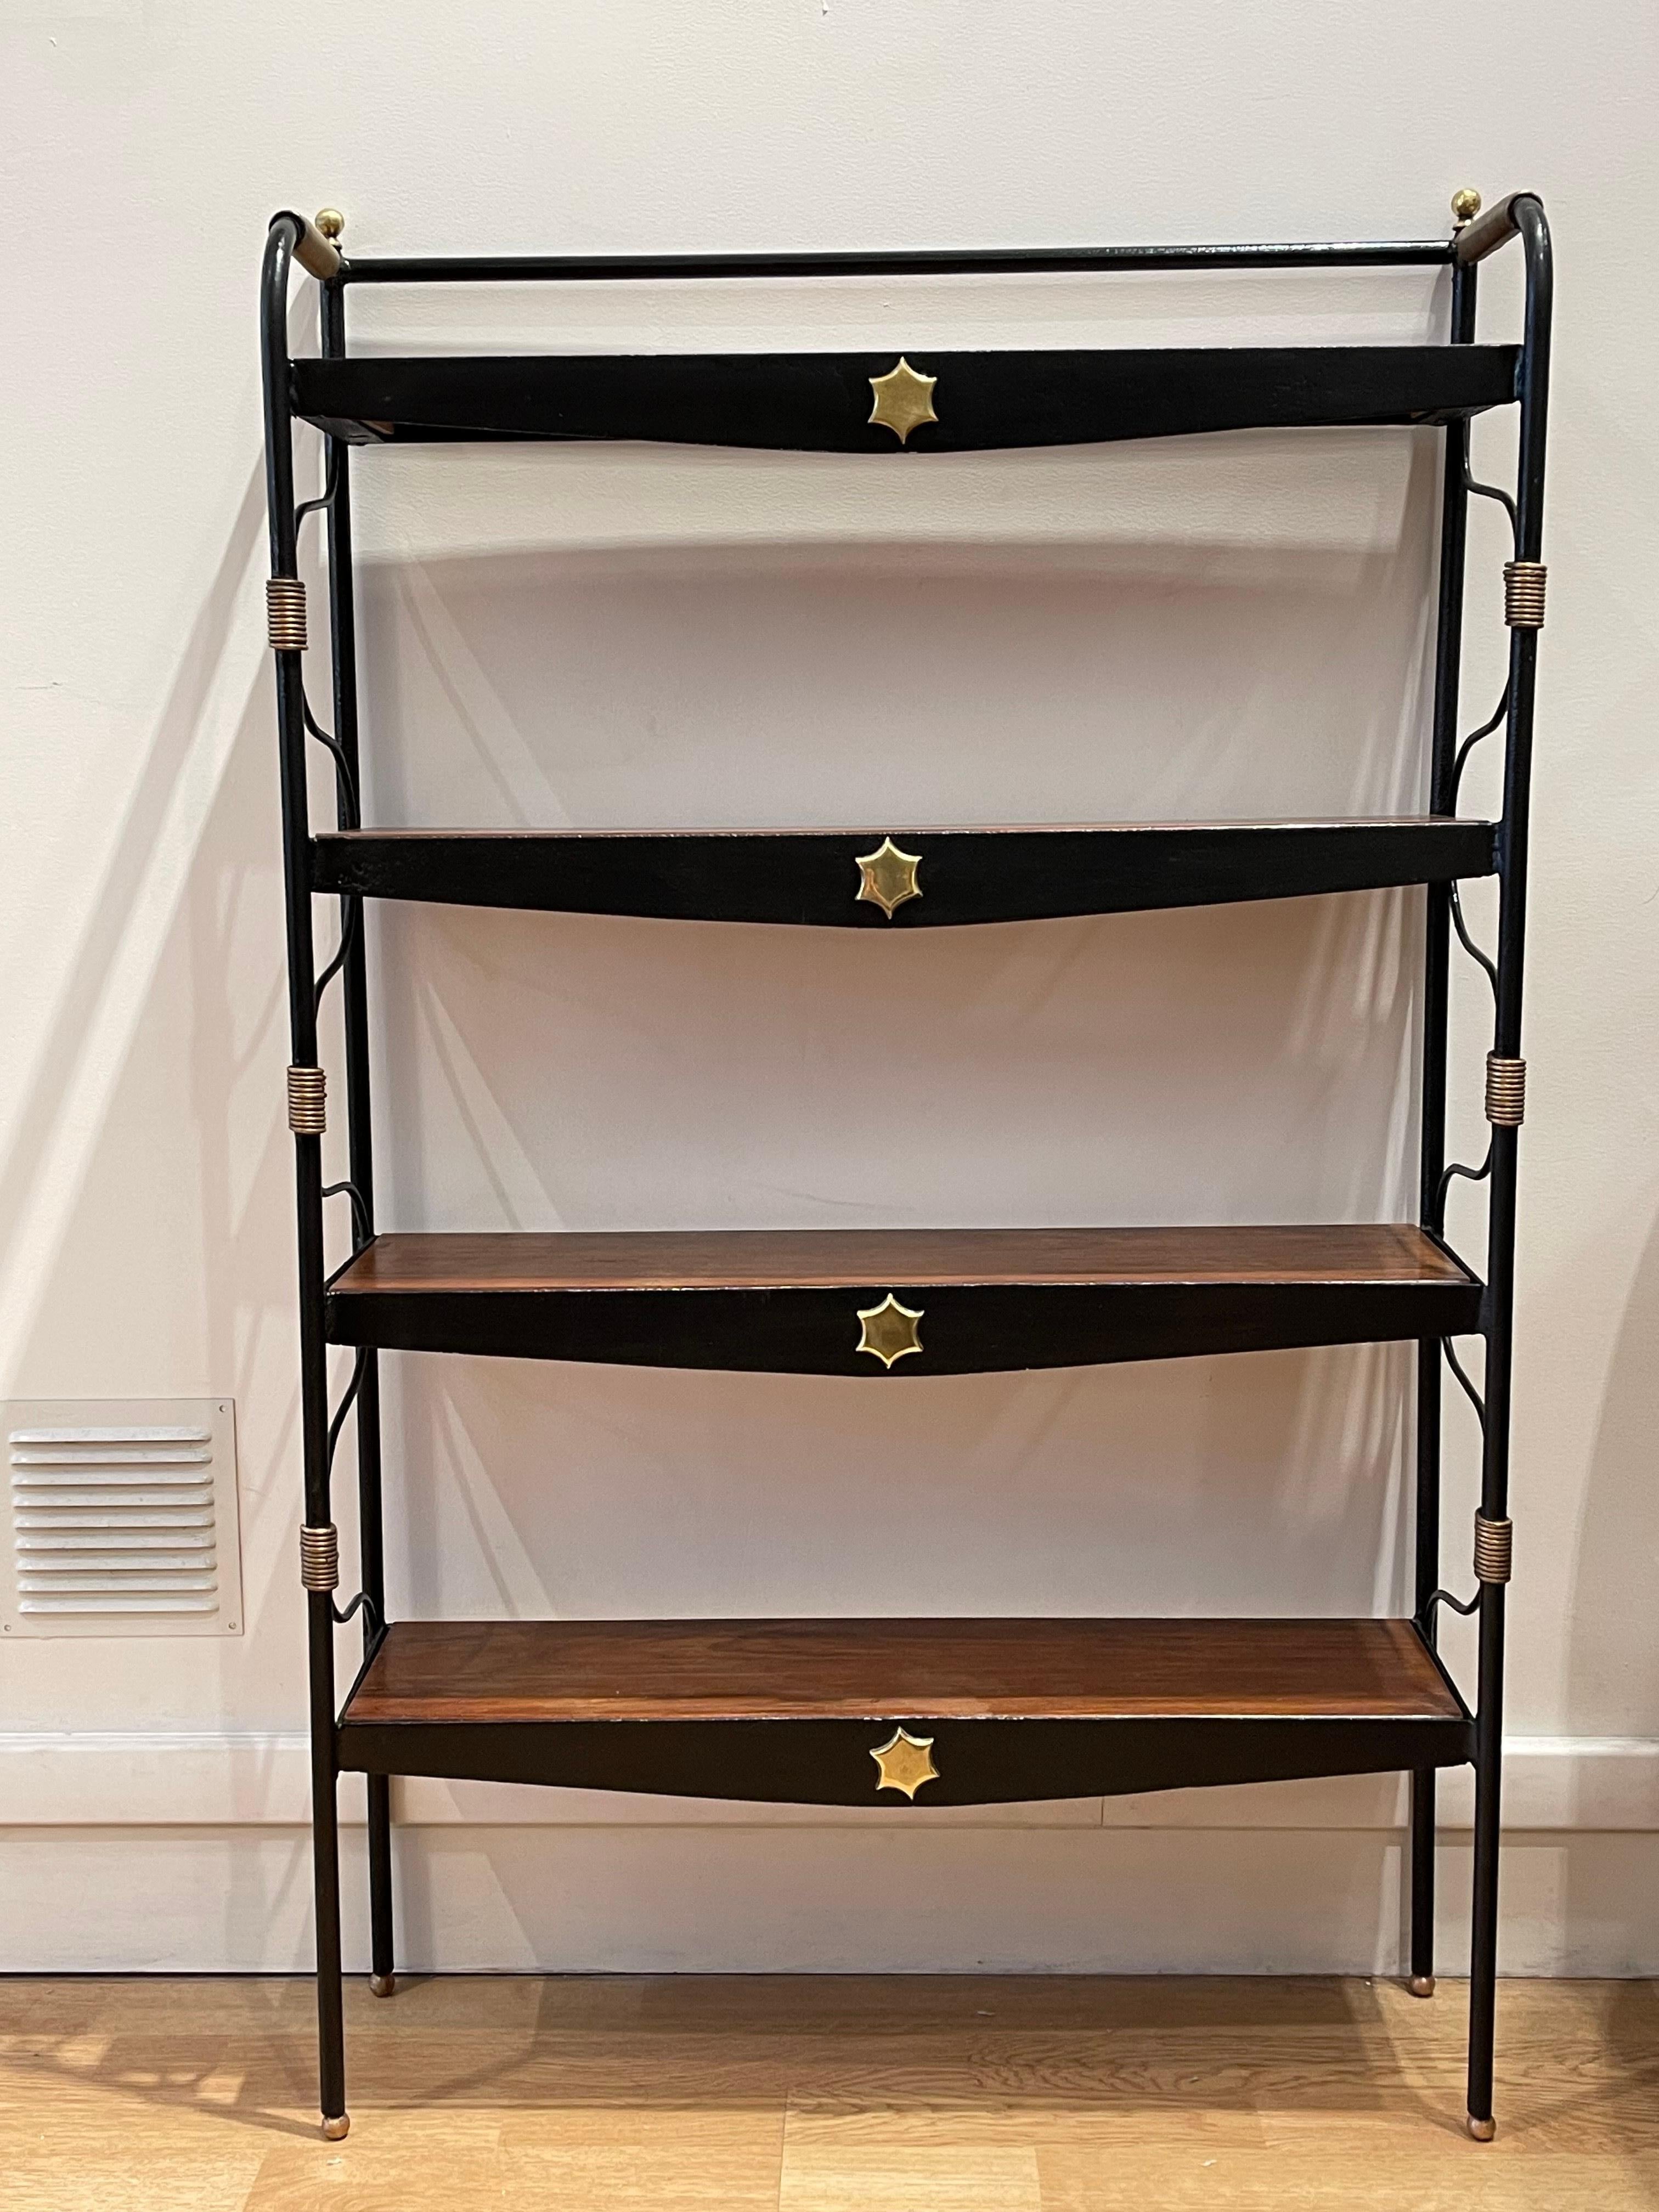 Jacques Adnet (1900-1984), wood, lacquered metal, brass, circa 1955
Dimensions : 106.5 x 65 x 17 cm / 41.929 x 25.590 x 6.693 inches.
Sublime bookcase crafted by Jacques Adnet. The bookcase features brass feet, a structure in black lacquered metal